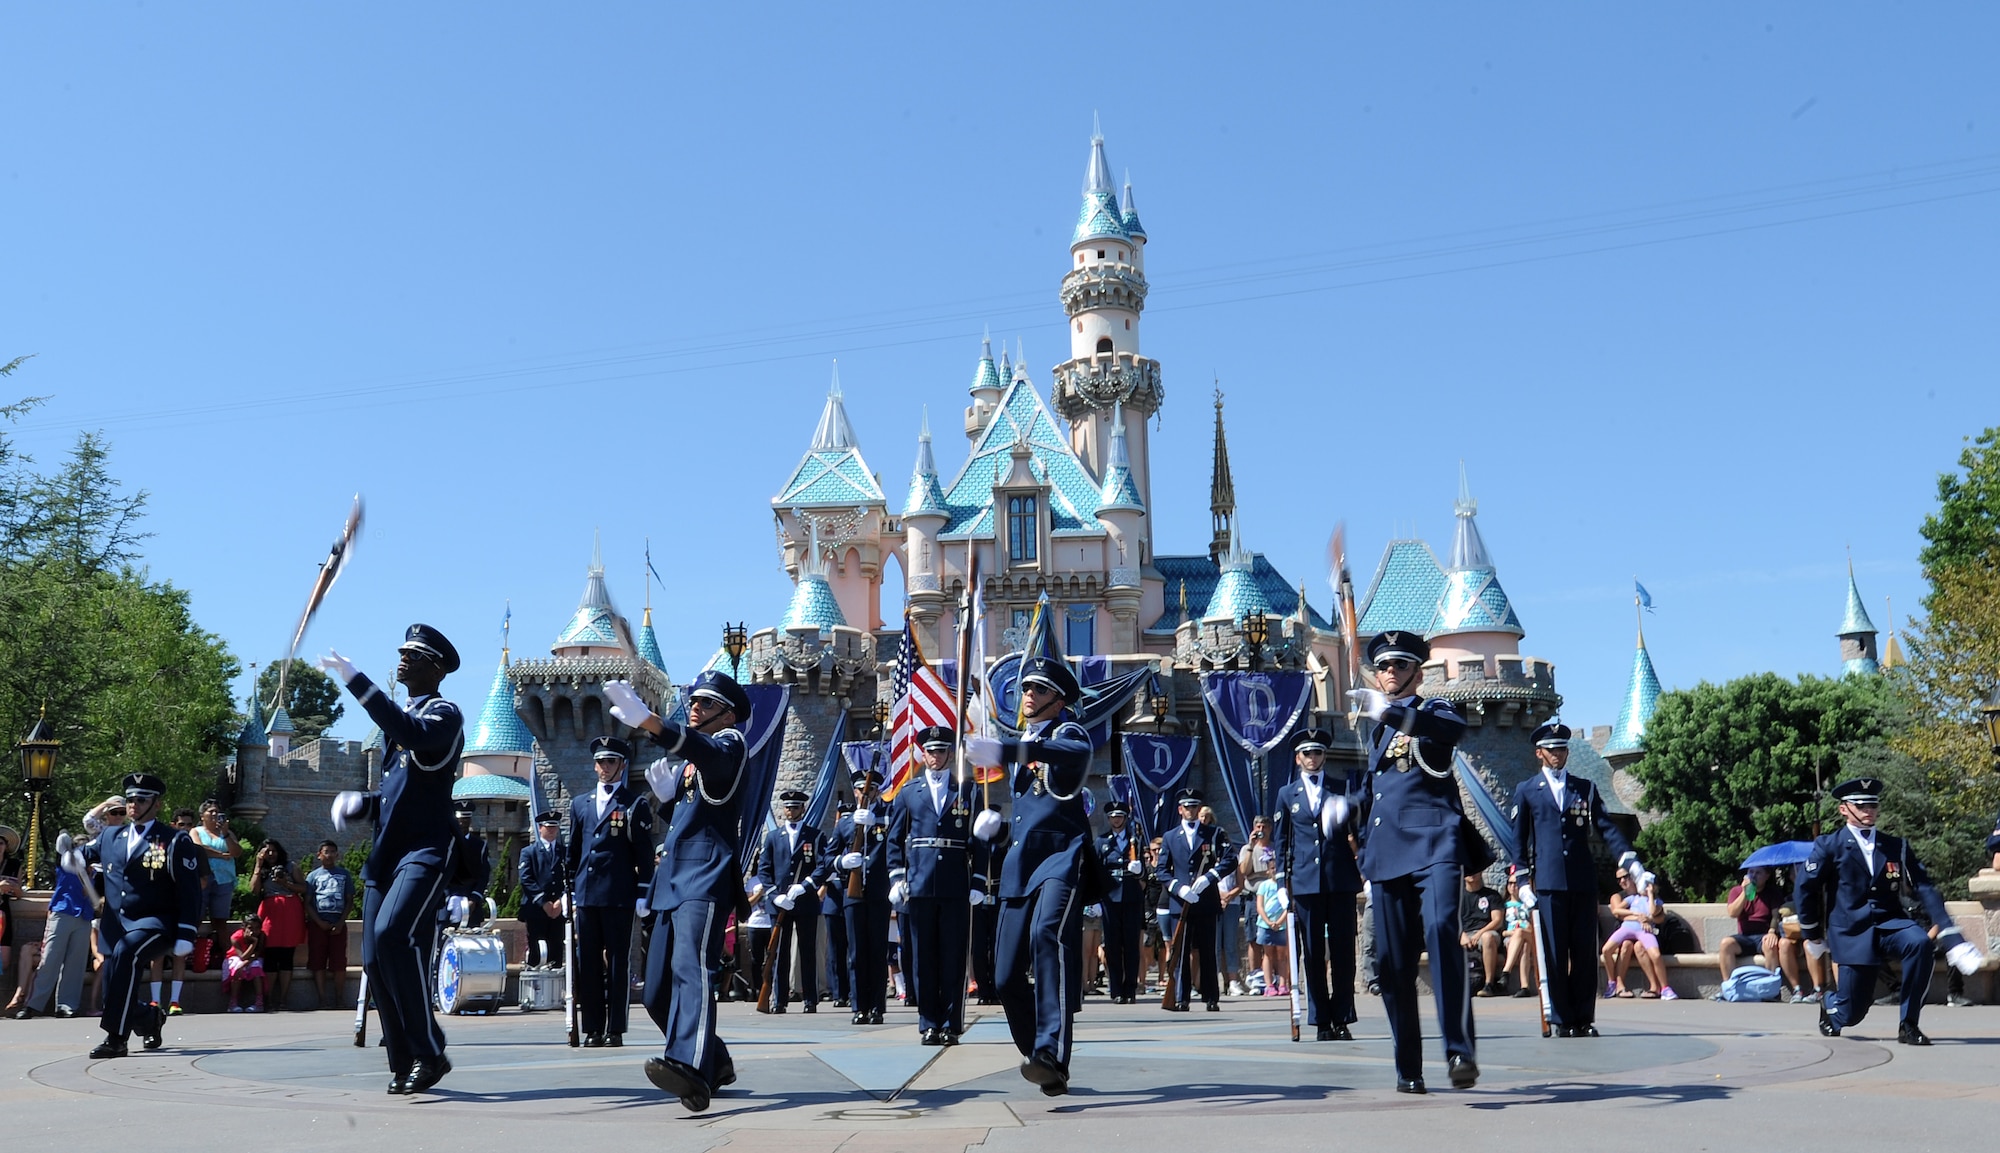 The United States Air Force Honor Guard performs at Disneyland in Anaheim, Calif., July 2, 2015. During the Fourth of July weekend each year, Disneyland invites military units to the park for special performances, a tradition started by Walt Disney on opening day. (U.S. Air Force photo/Staff Sgt. Nichelle Anderson)